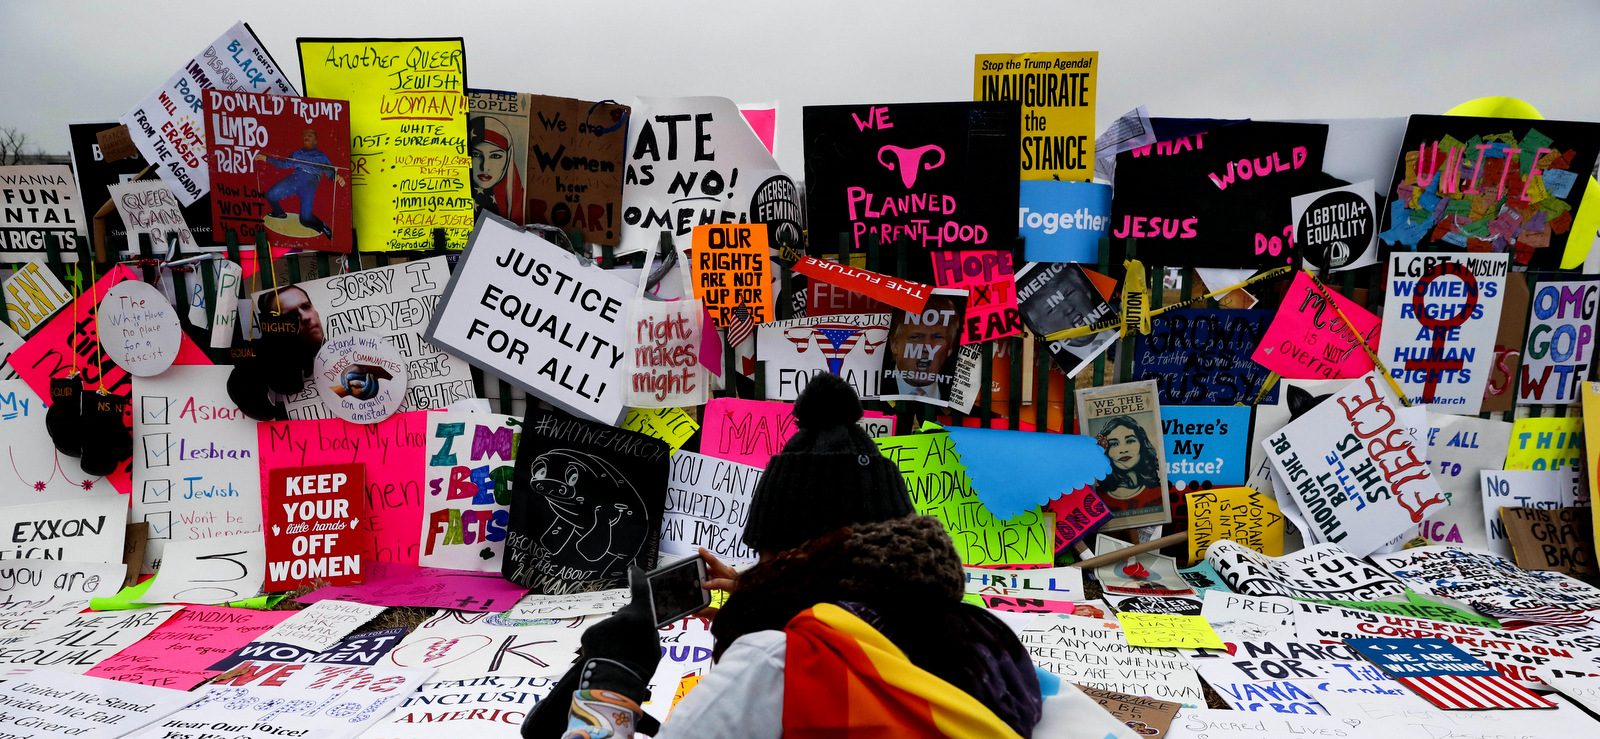 Protesters build a wall of signs outside the White House for the Women's March on Washington during the first full day of Donald Trump's presidency in Washington, Jan. 21, 2017. (AP/John Minchillo)